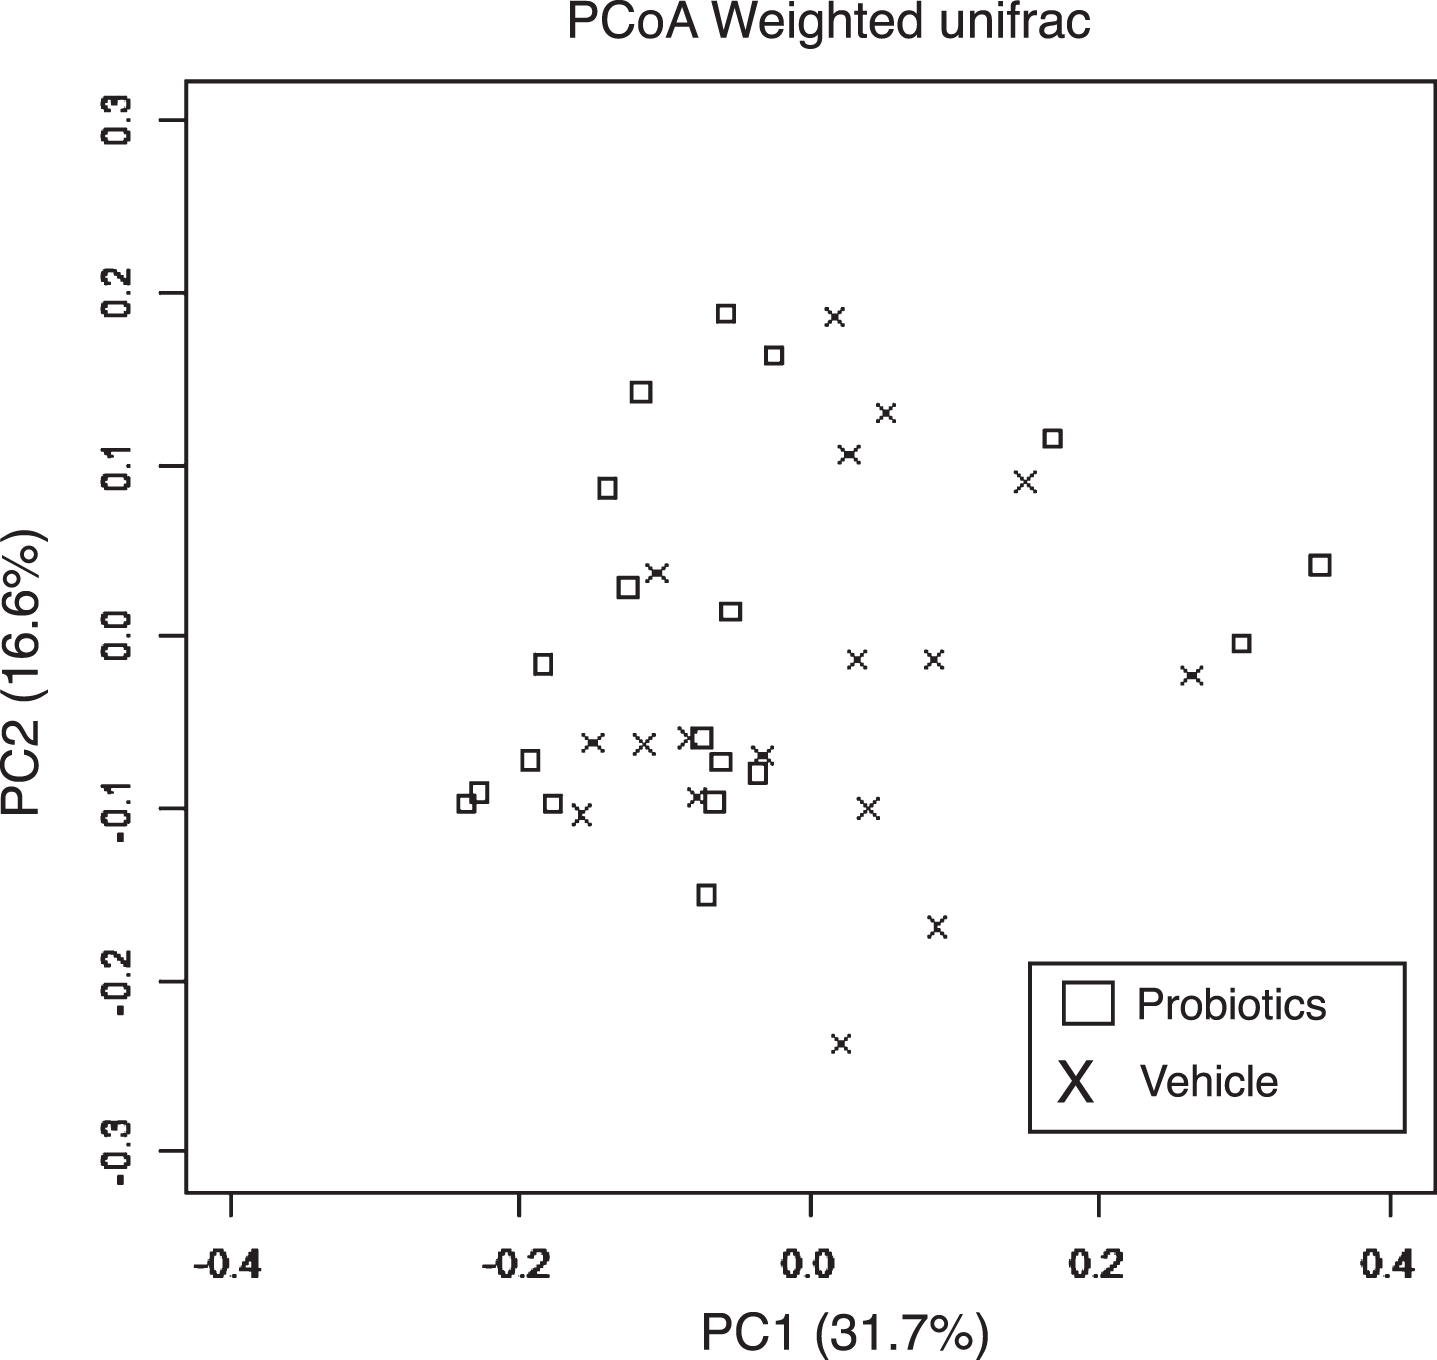 Effects of B. breve MCC1274 supplementation on gut microbiota. PCoA based on weighted unifrac distance from 16S rRNA sequencing data did not show a significant difference between AppNL-G-F mice with and without B. breve MCC1274 supplementation as determined by permutation MANOVA (p =0.379).